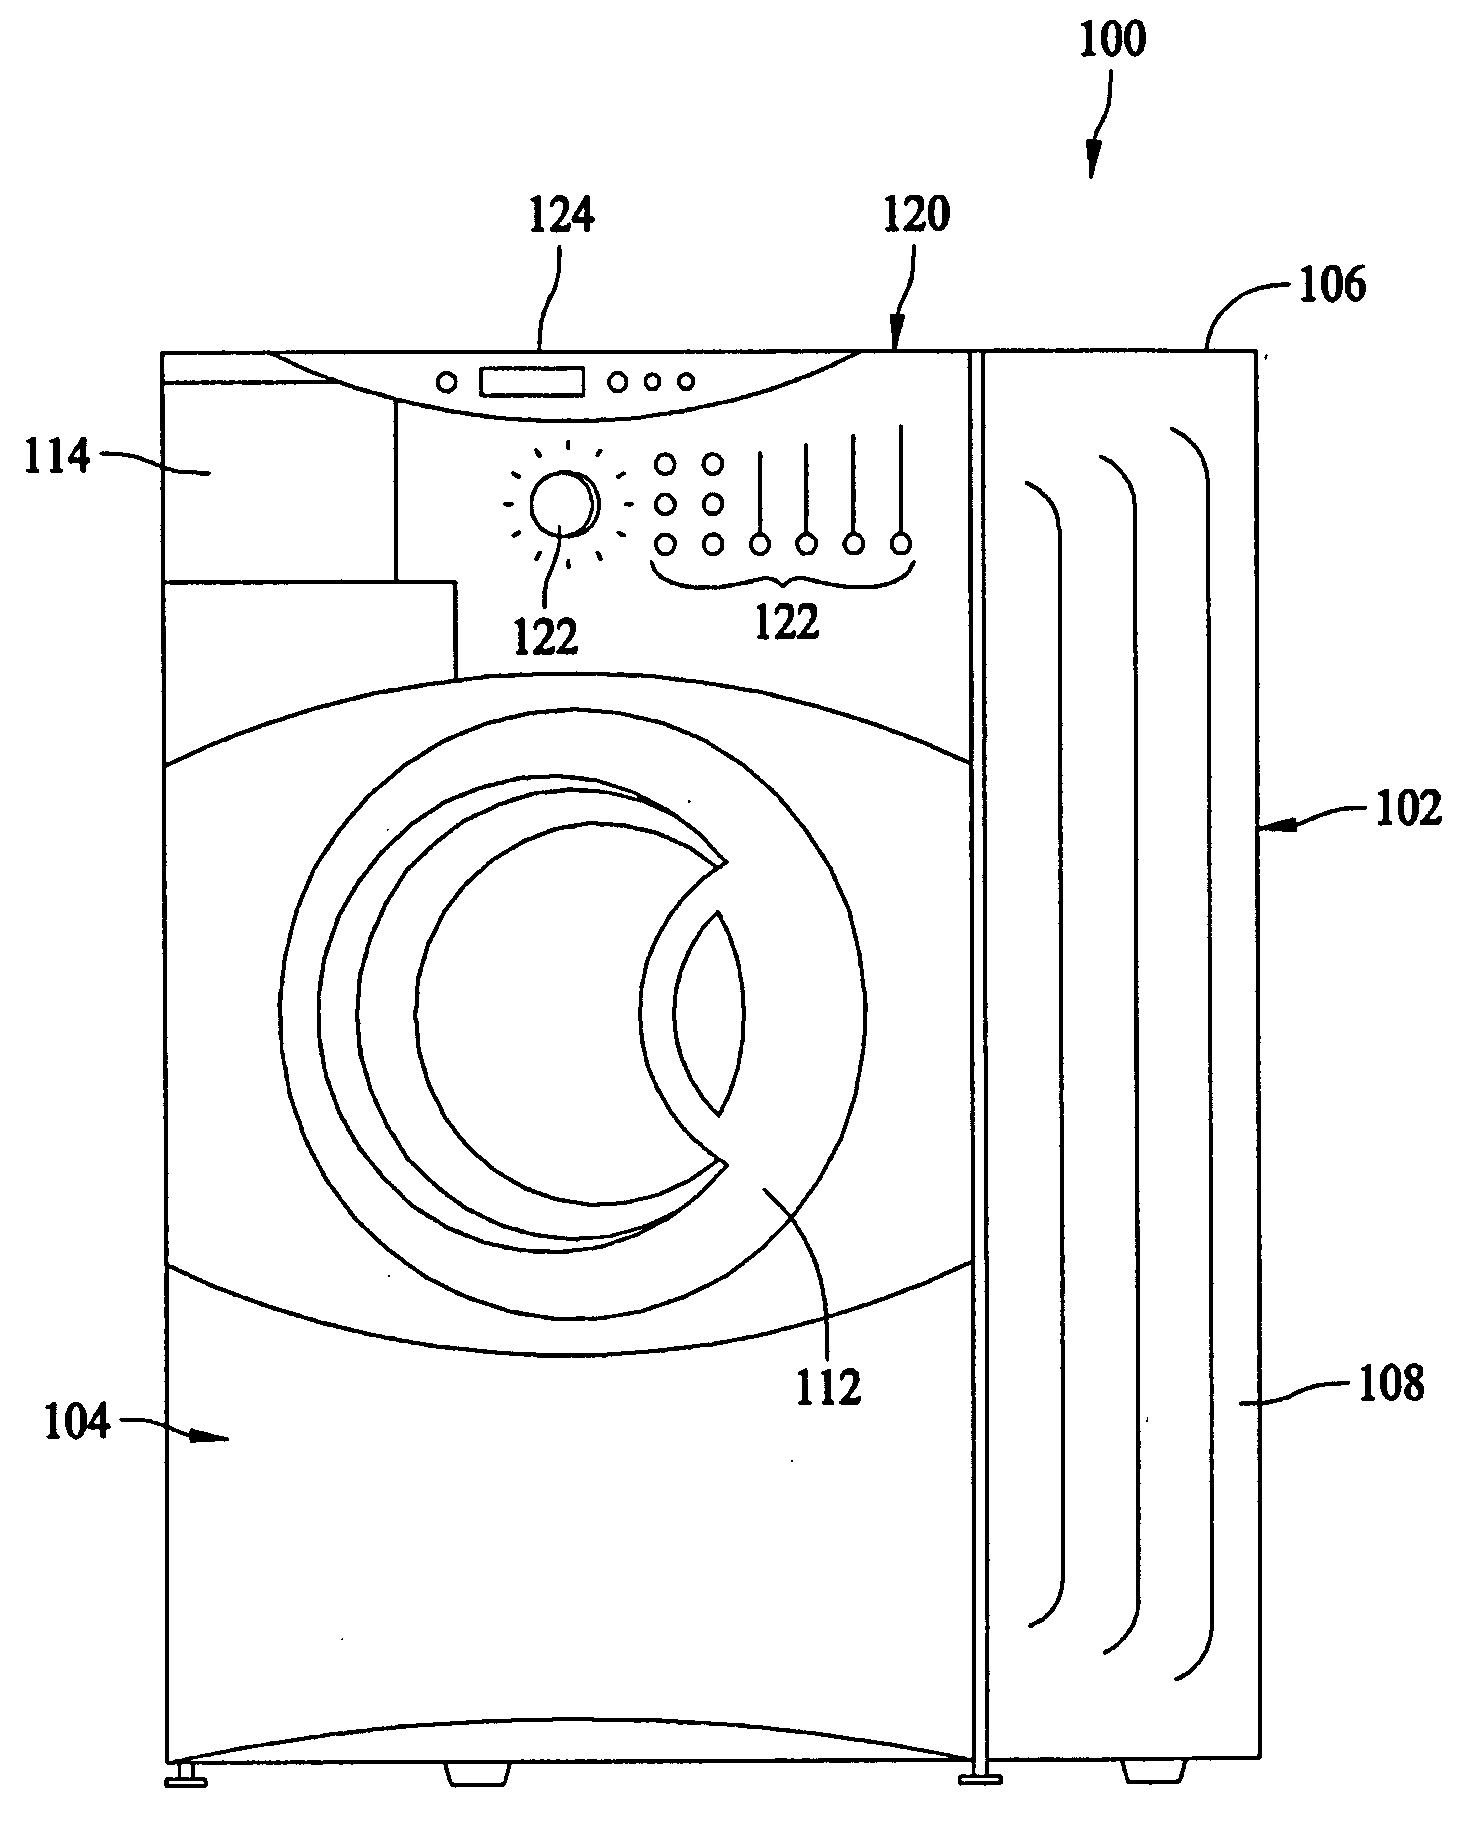 Methods and apparatus for monitoring a washing machine